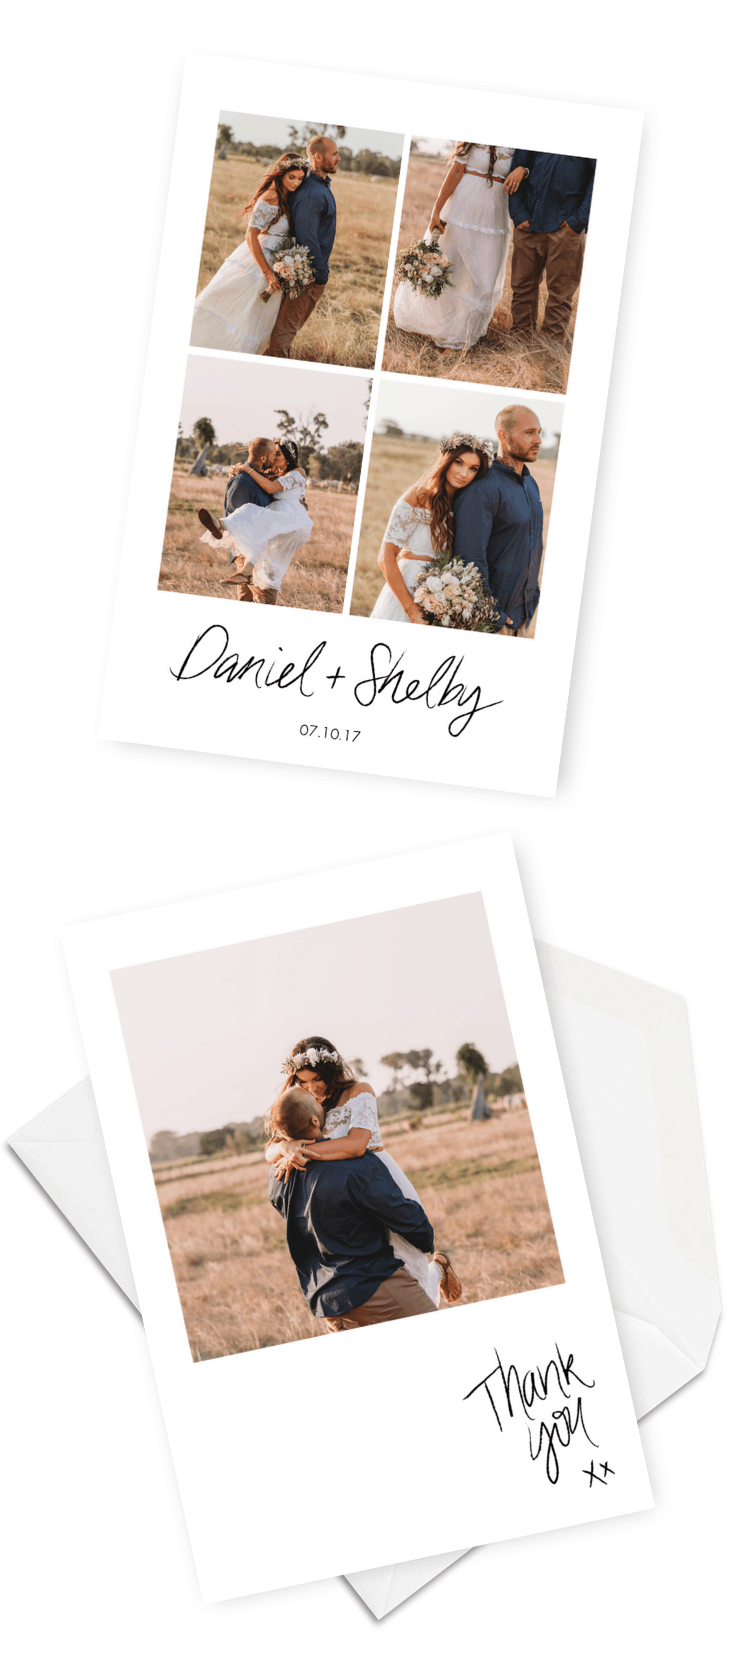 Rustic Wedding Thank You Cards Pictures Photos For the Love of Stationery Morgan Parremore Photography